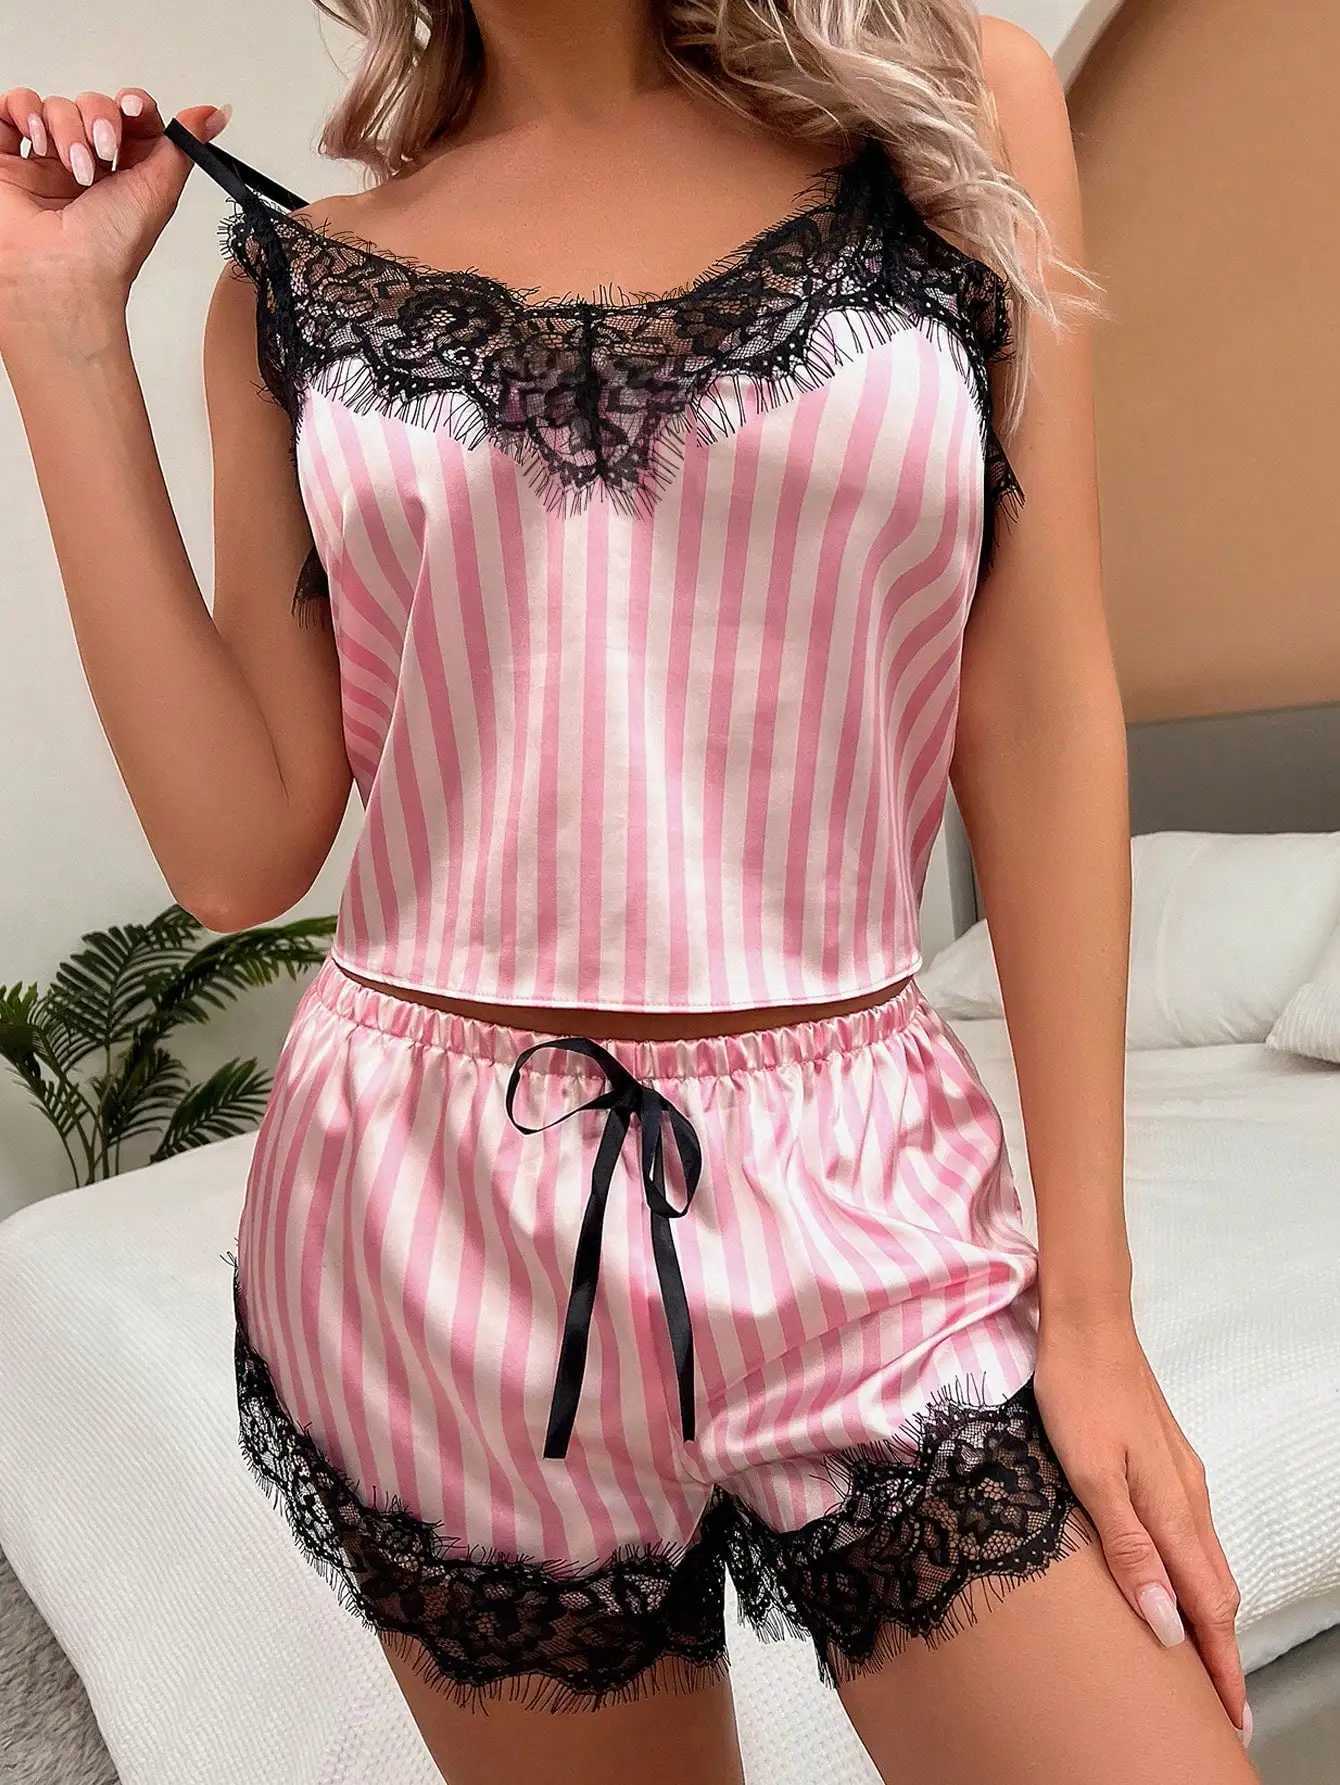 Other Panties New Sexy pajama set lace soft silk-like halter lingerie pink white vertical striped fun erotic sleepwear sexy women YQ240130